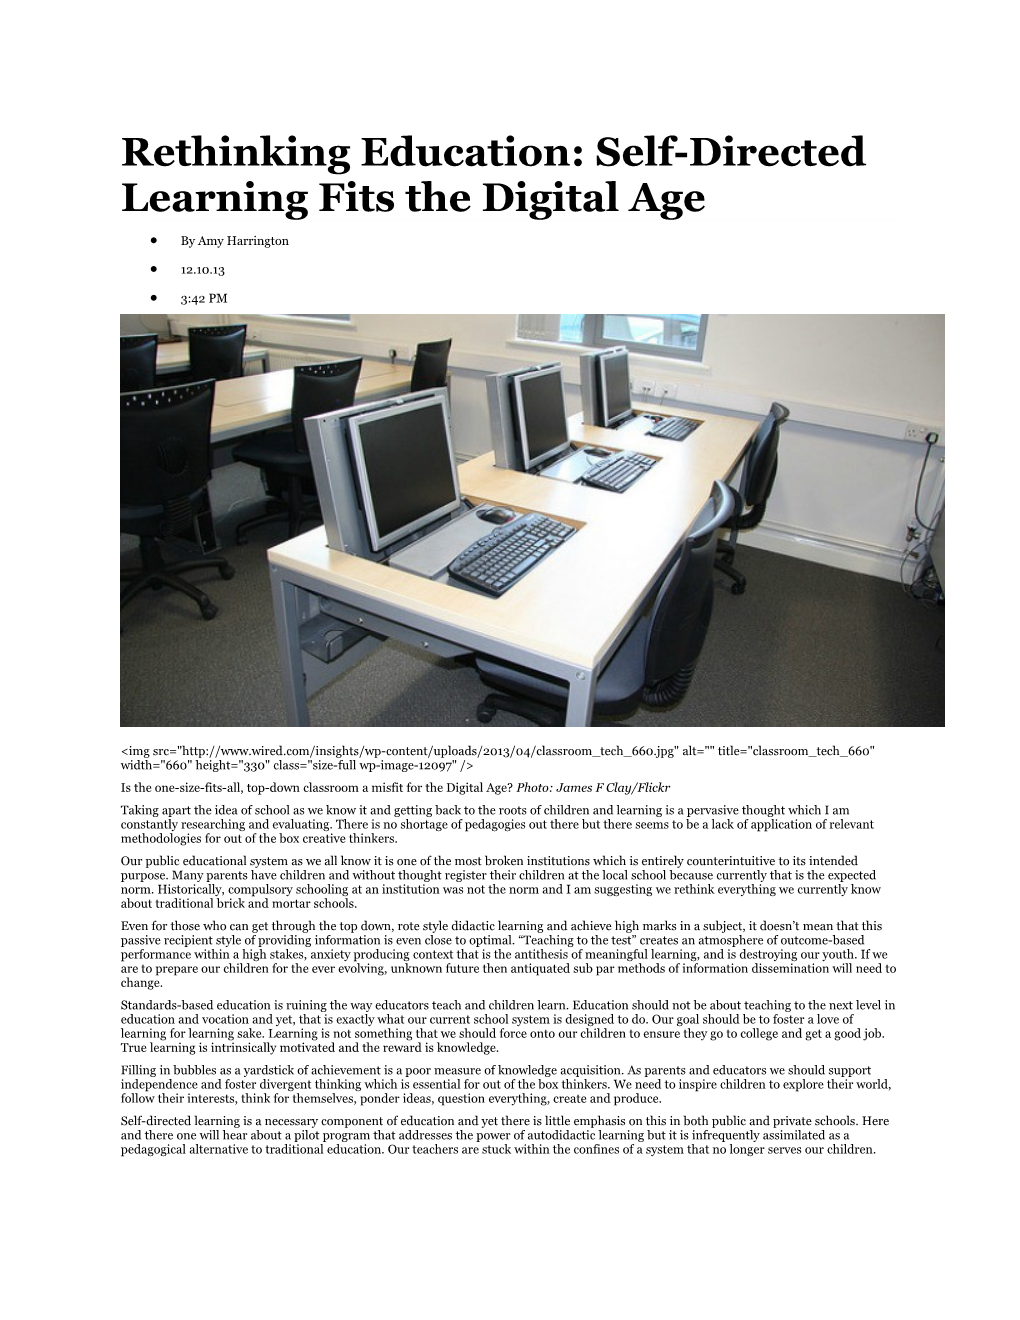 Rethinking Education: Self-Directed Learning Fits the Digital Age